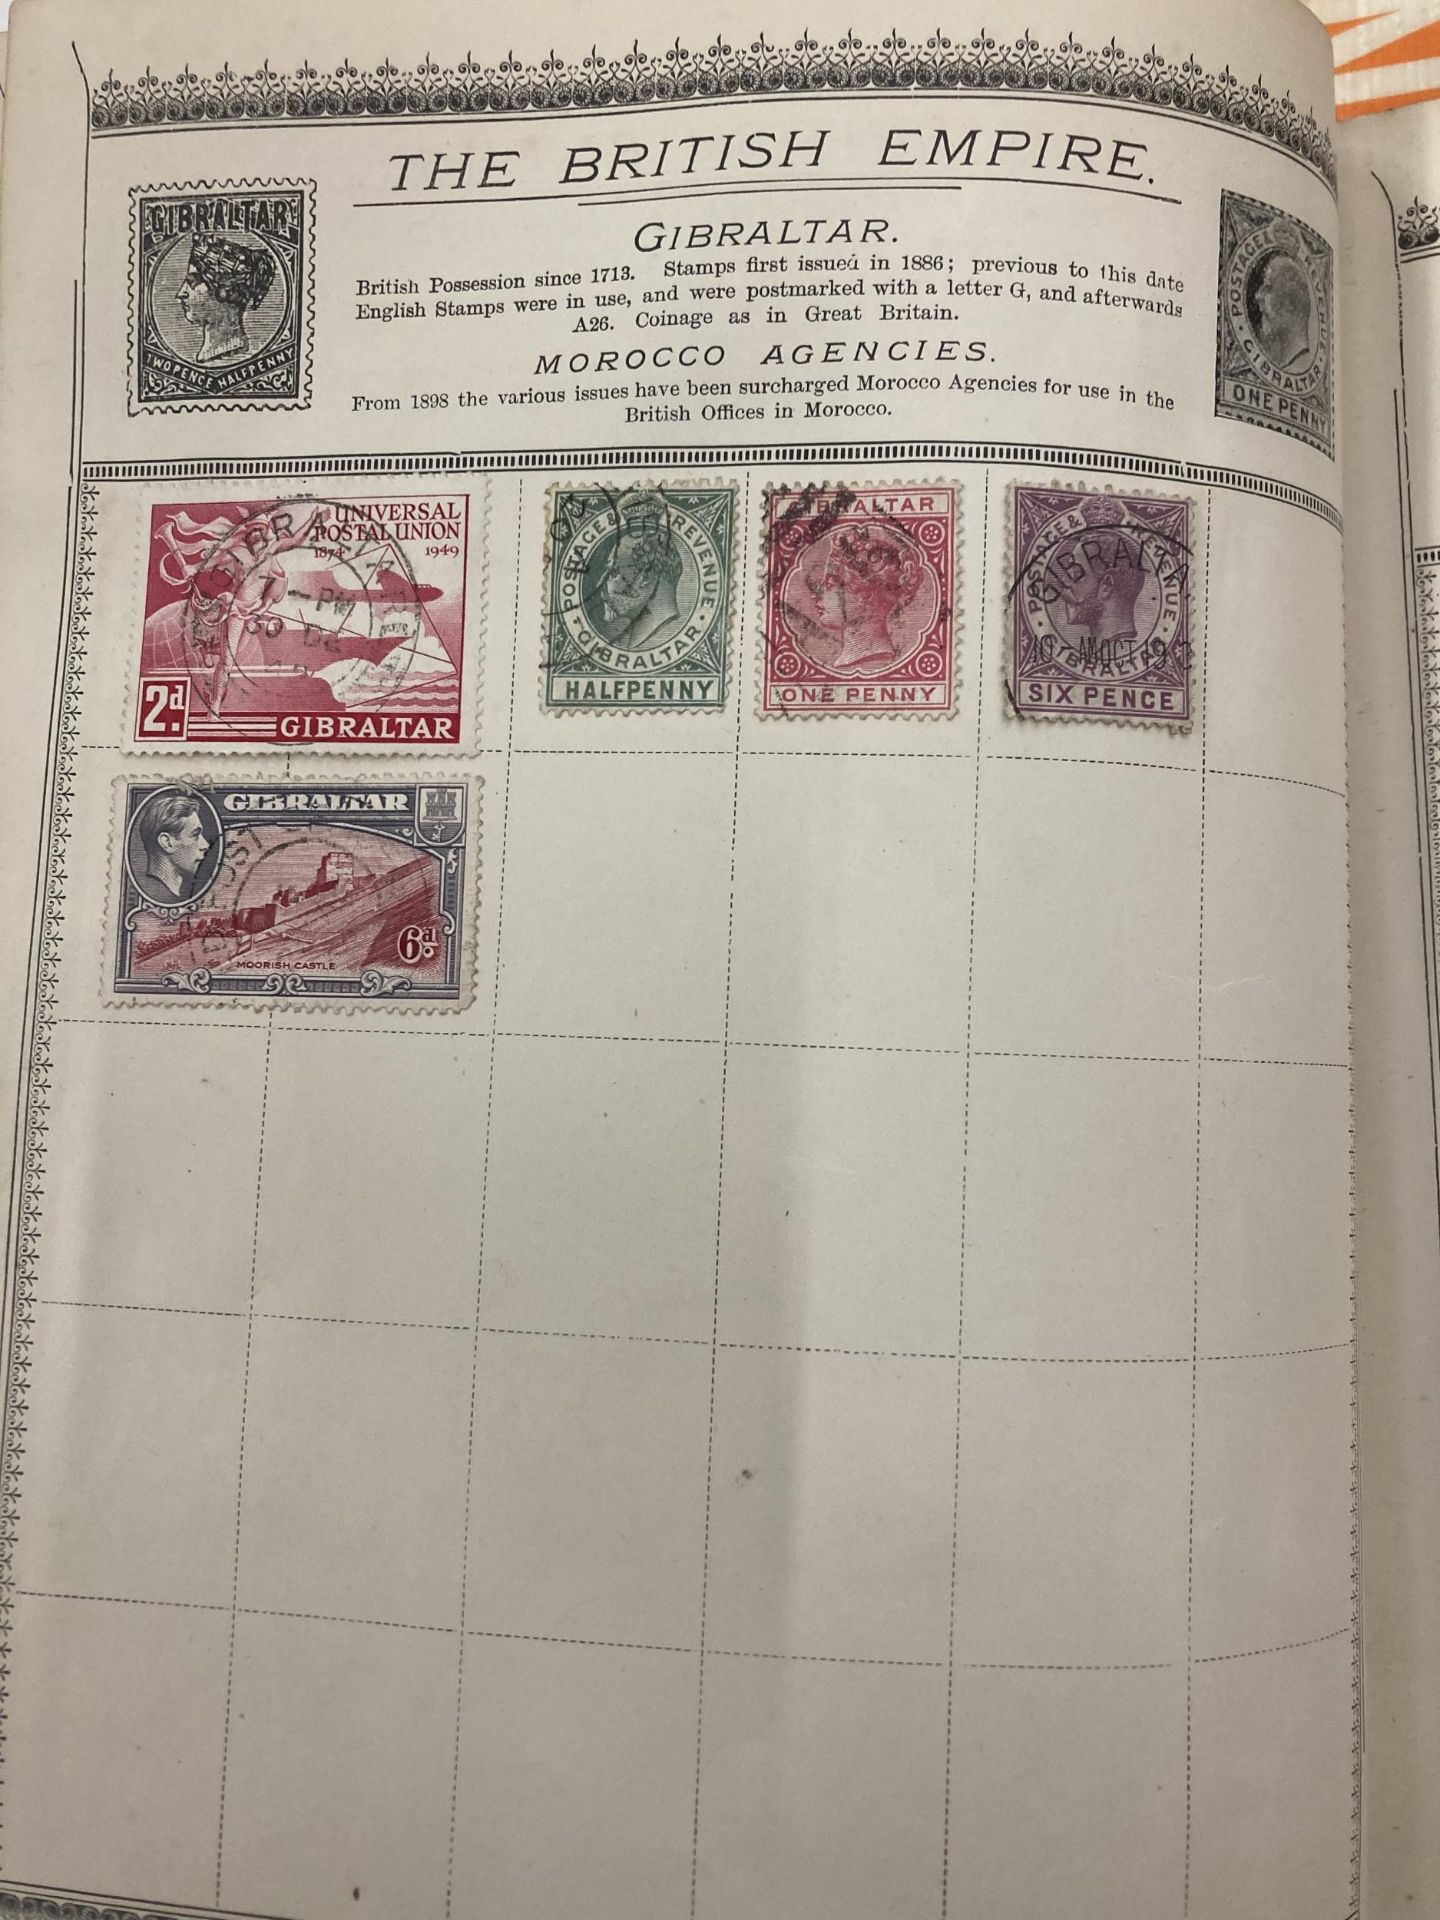 A COLLECTION OF STAMPS, COMMENWEALTH EXAMPLES ON SHEETS, WORLD POSTAGE ALBUM, STANLEY GIBBONS - Image 6 of 8